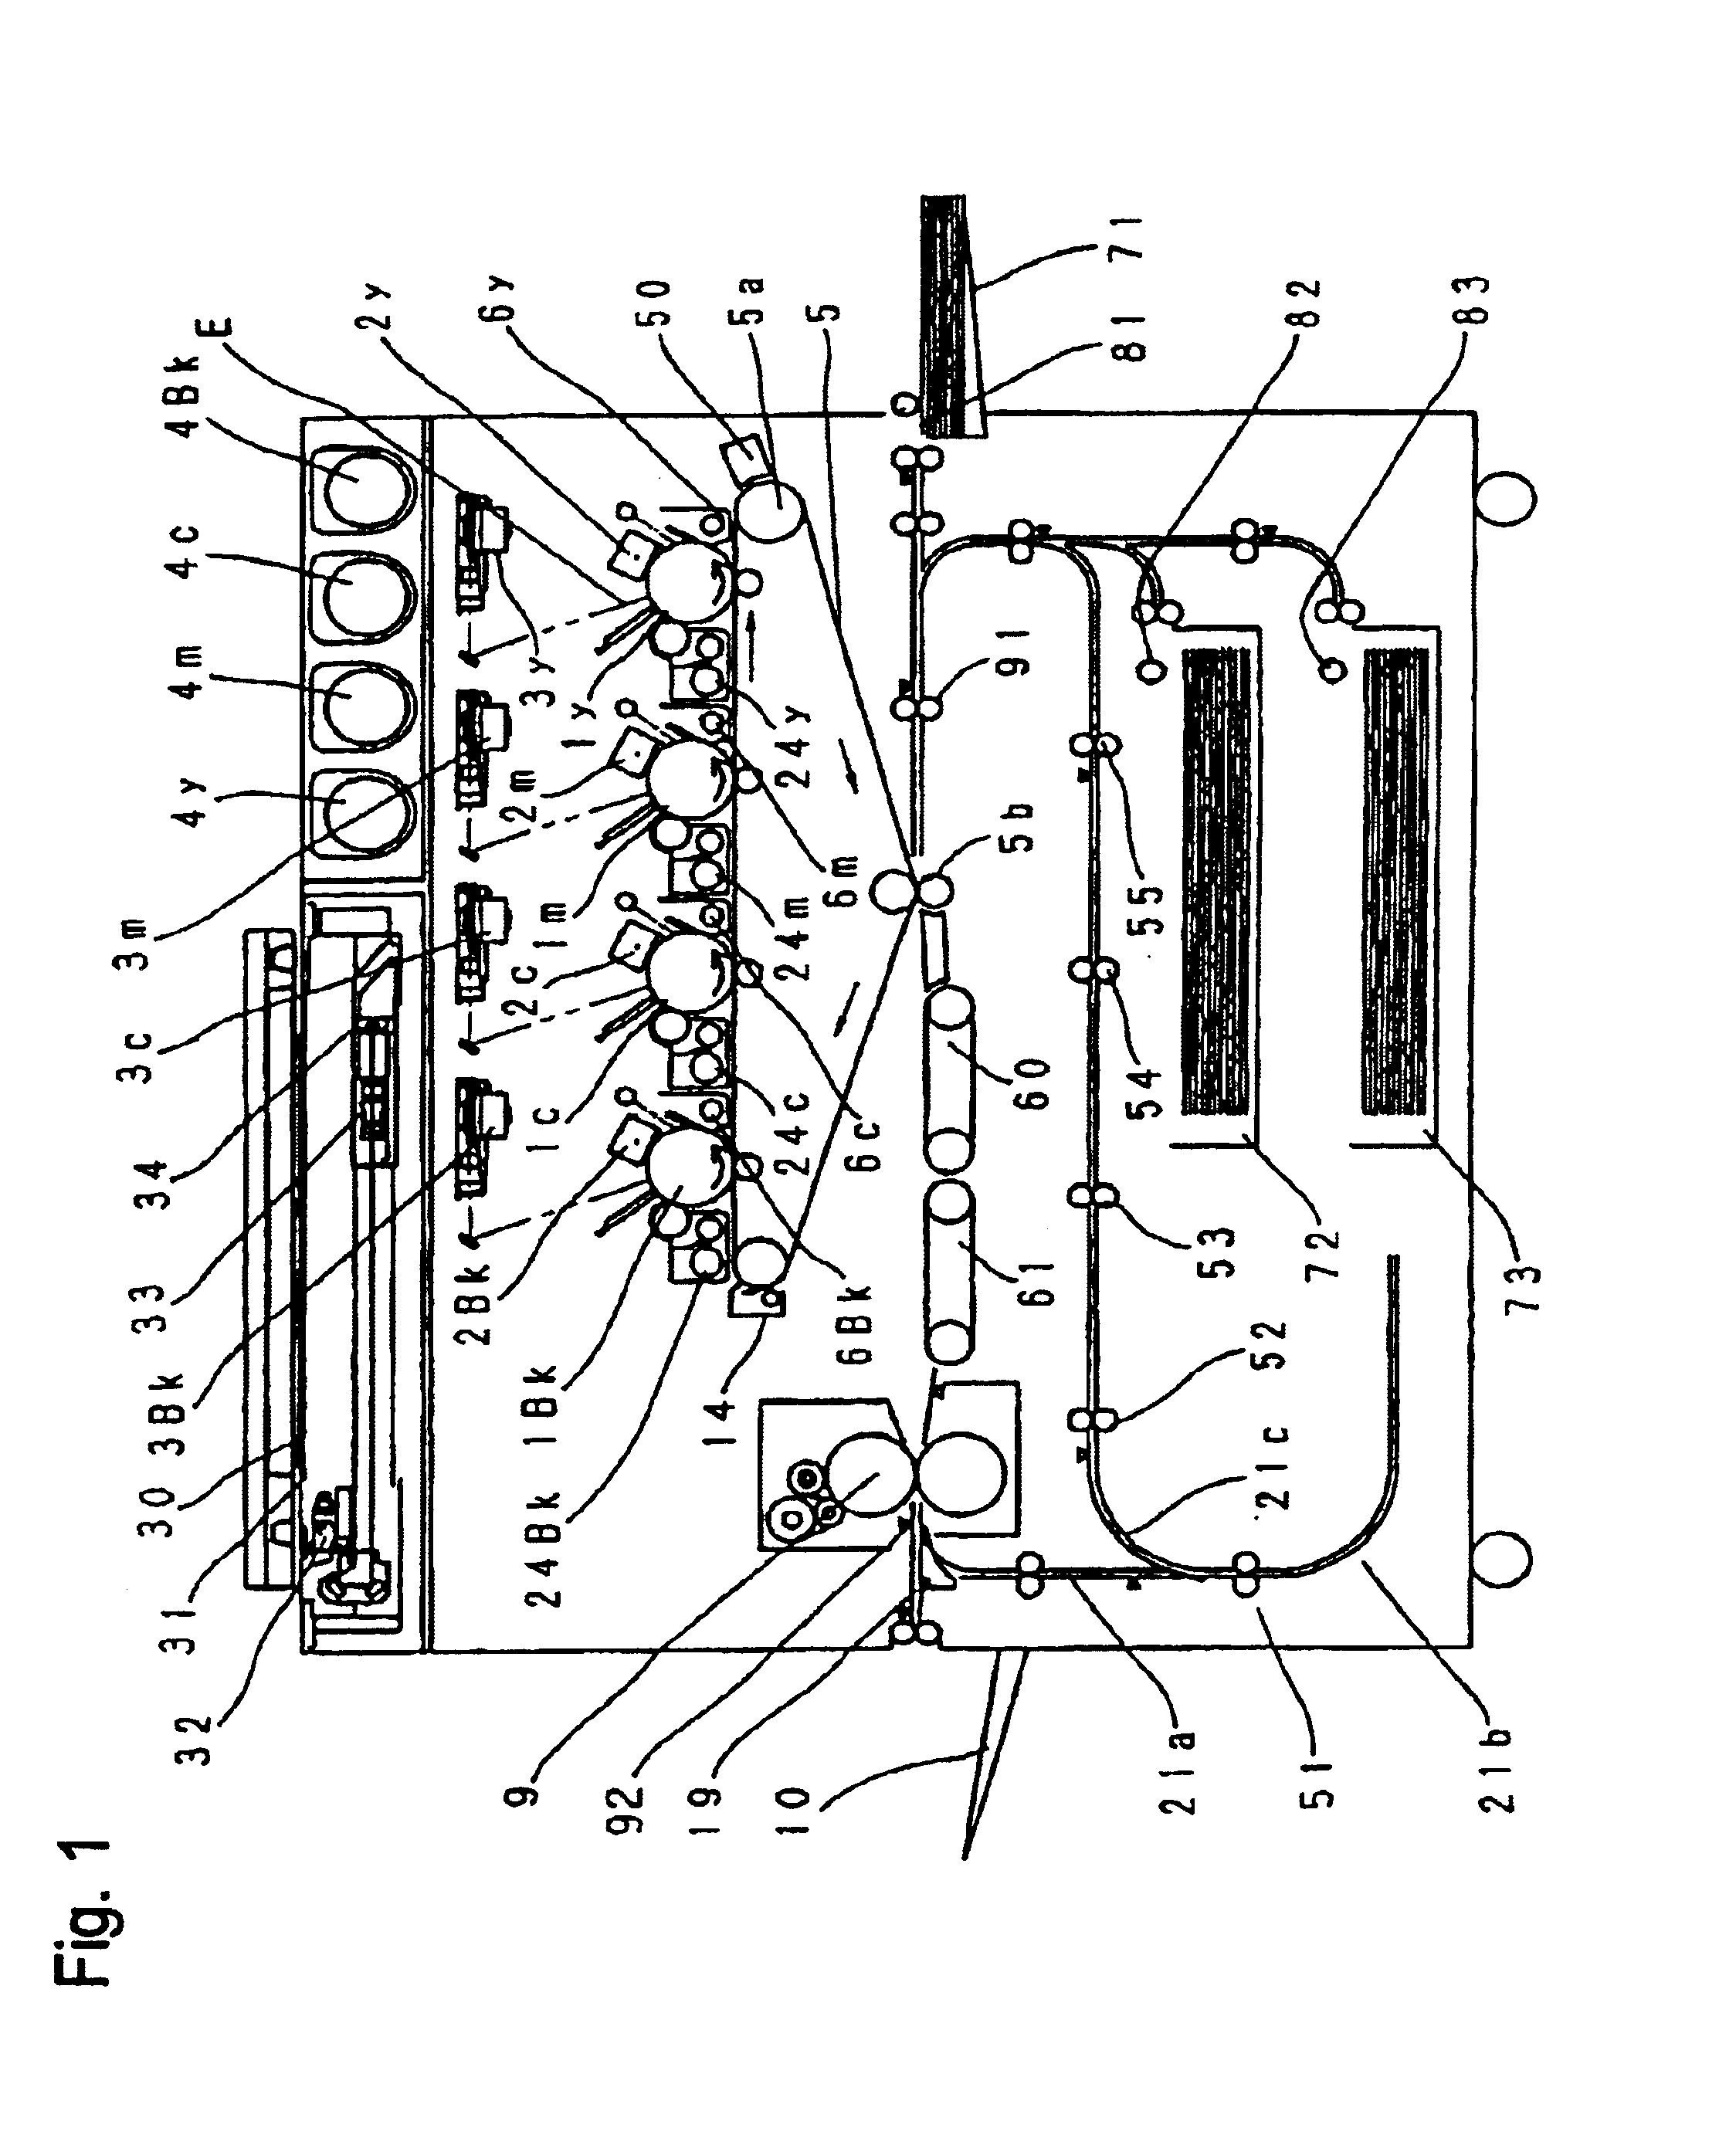 Image forming apparatus including plural conveyor units with conveyance path length/conveyance speed relationships